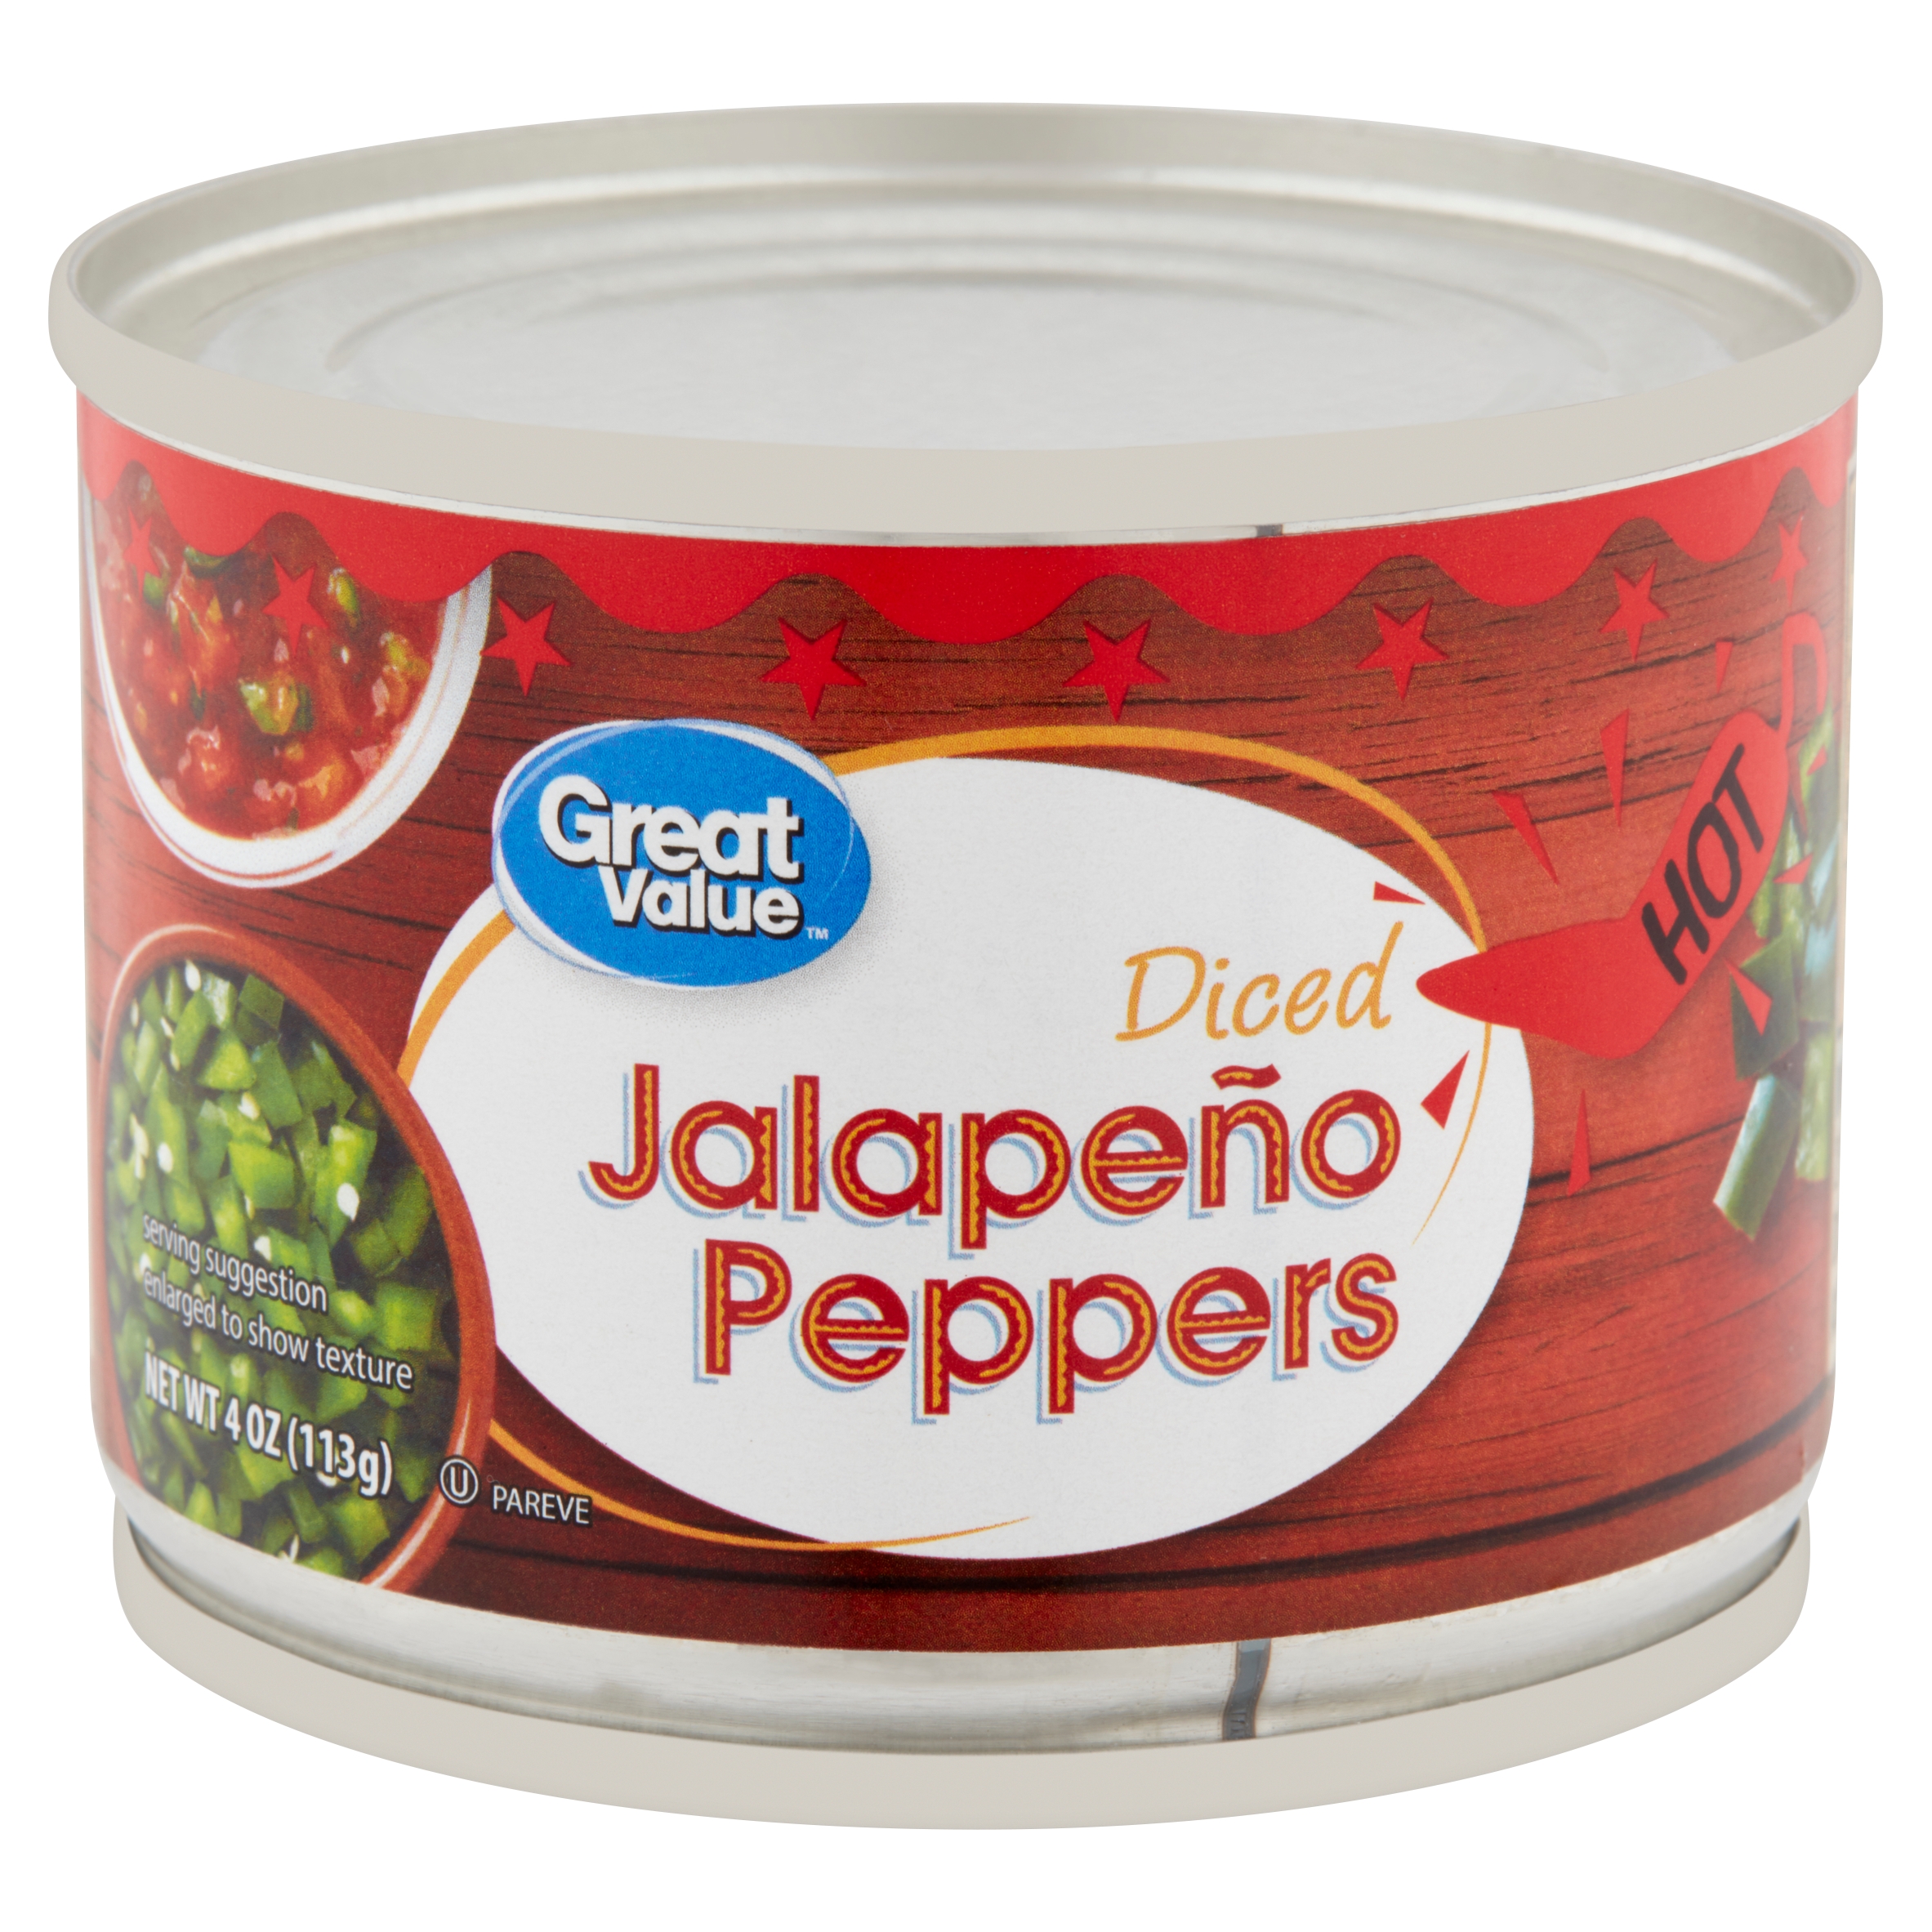 Great Value Hot Diced Jalapeno Peppers, 4 Oz